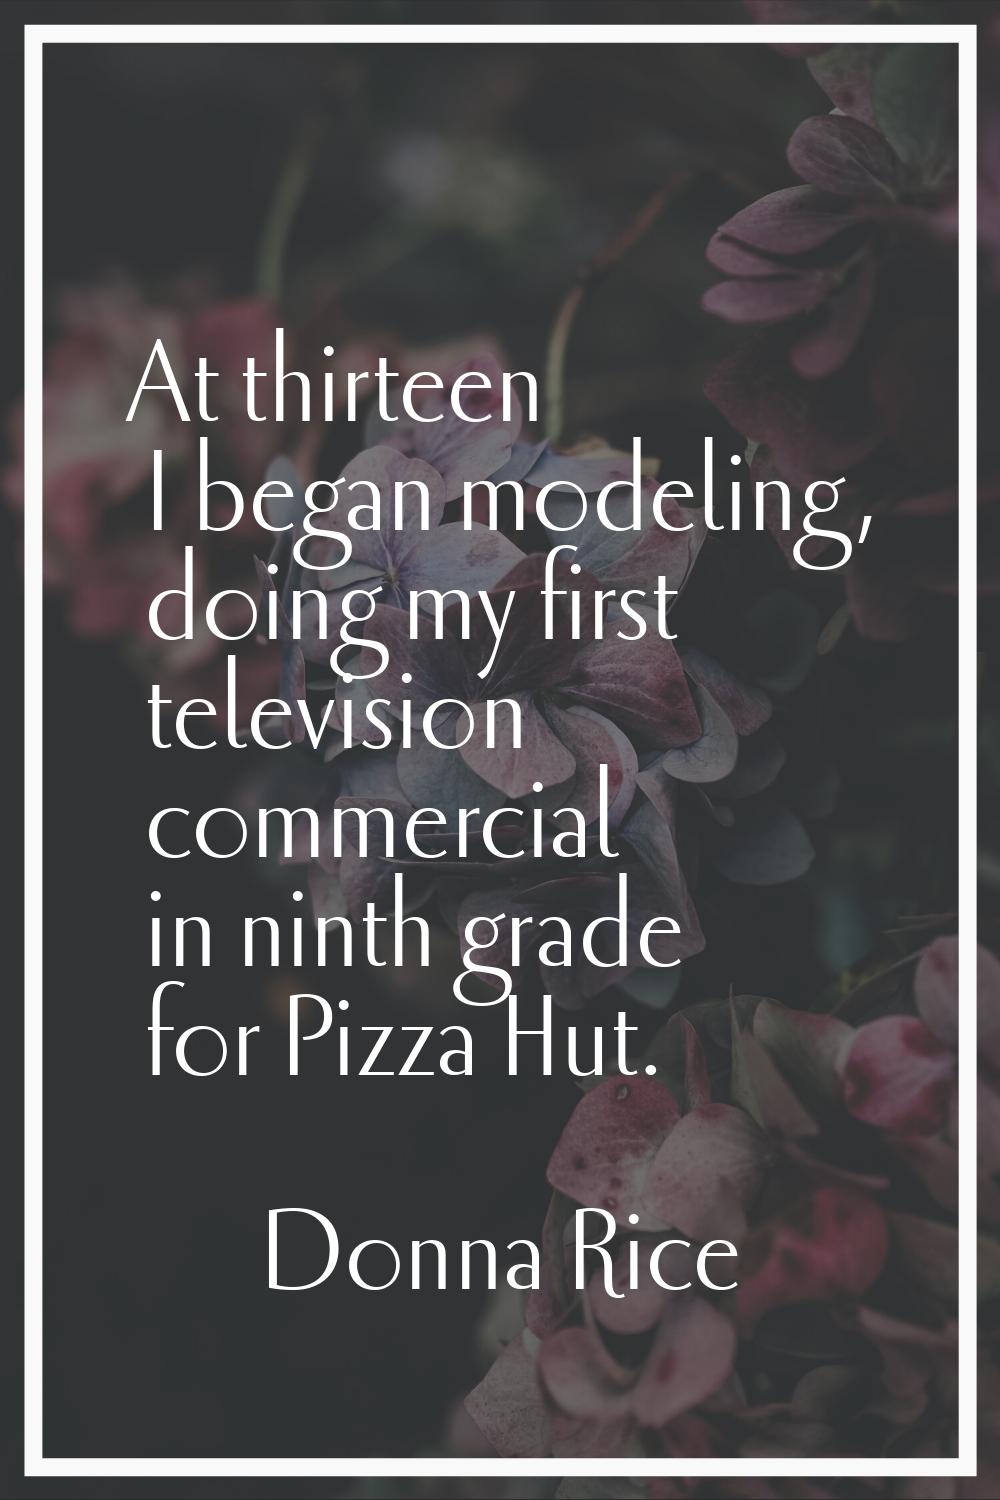 At thirteen I began modeling, doing my first television commercial in ninth grade for Pizza Hut.